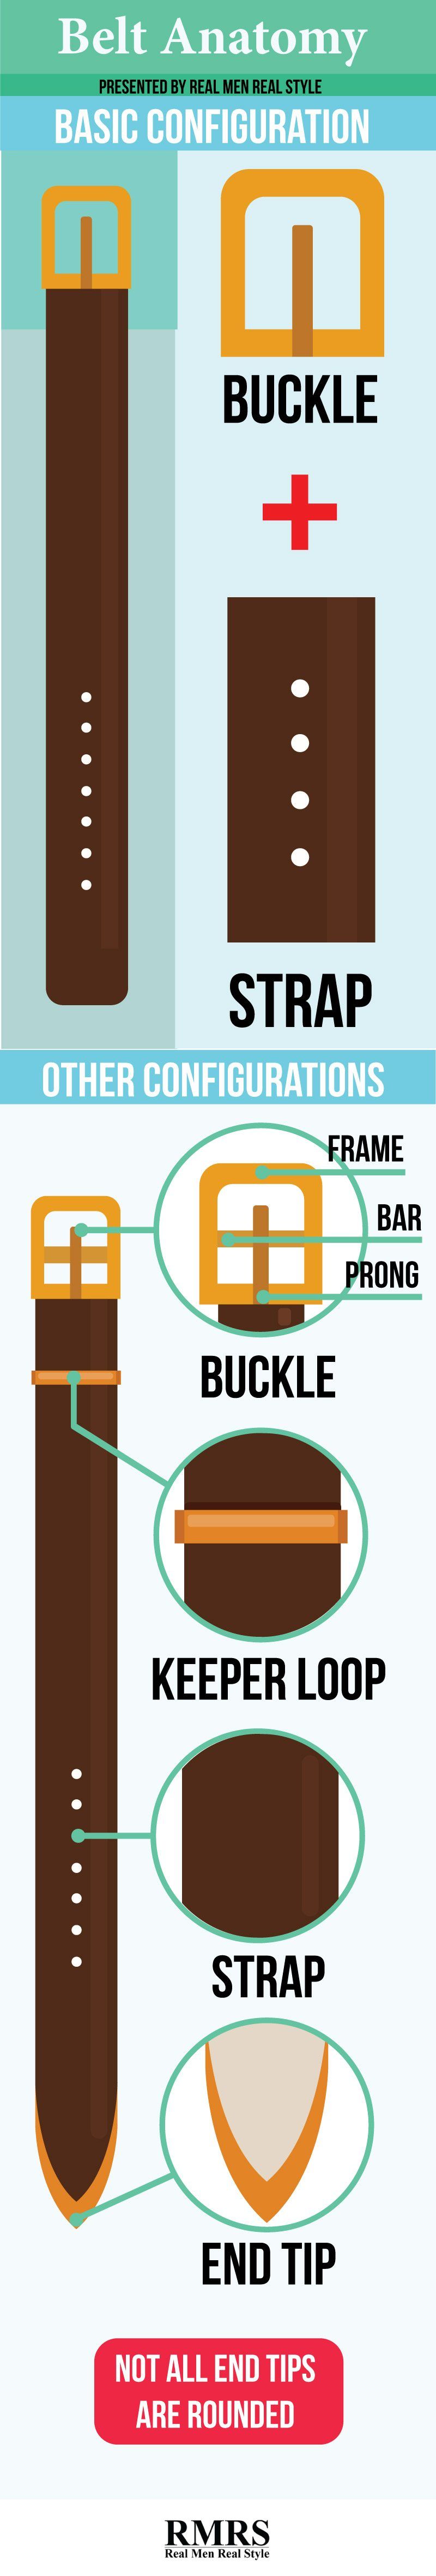 Man's Ultimate Guide to Belt Infographic